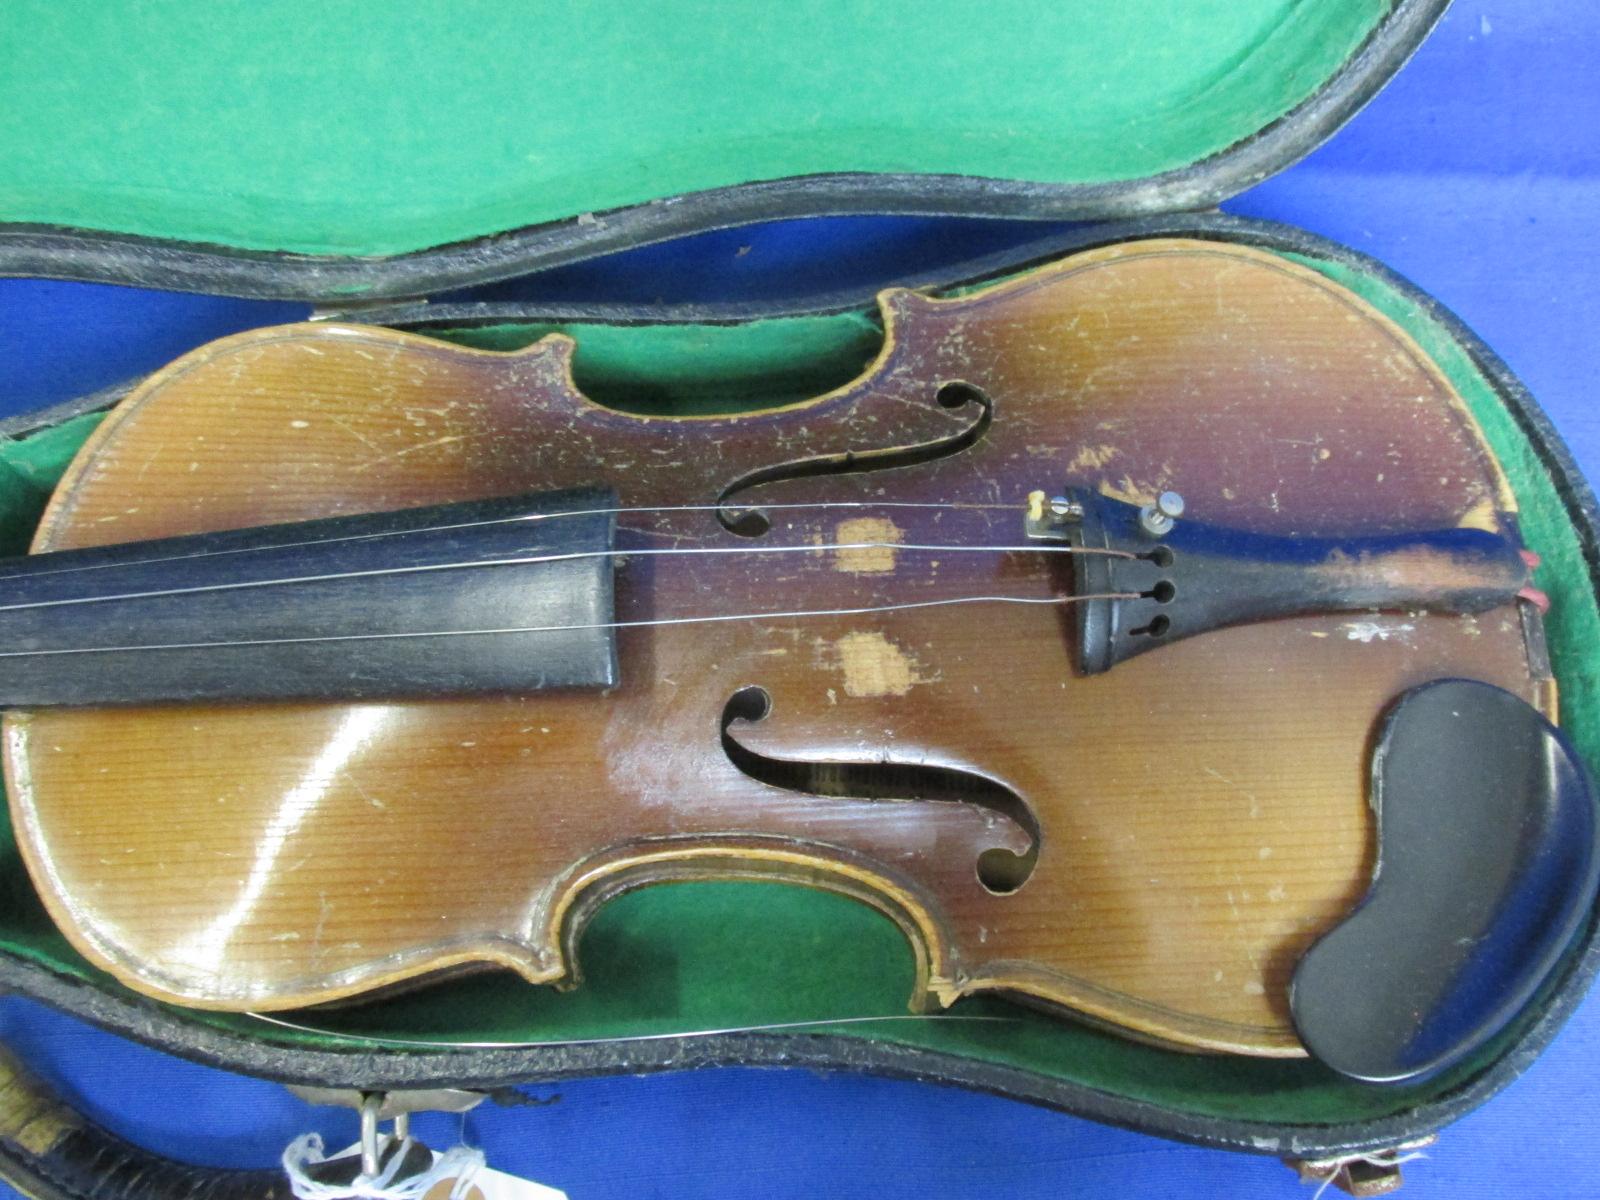 Antique Czech Made Ton Klar Violin with Bow (unmarked) in Antique Hard Case – See Pix